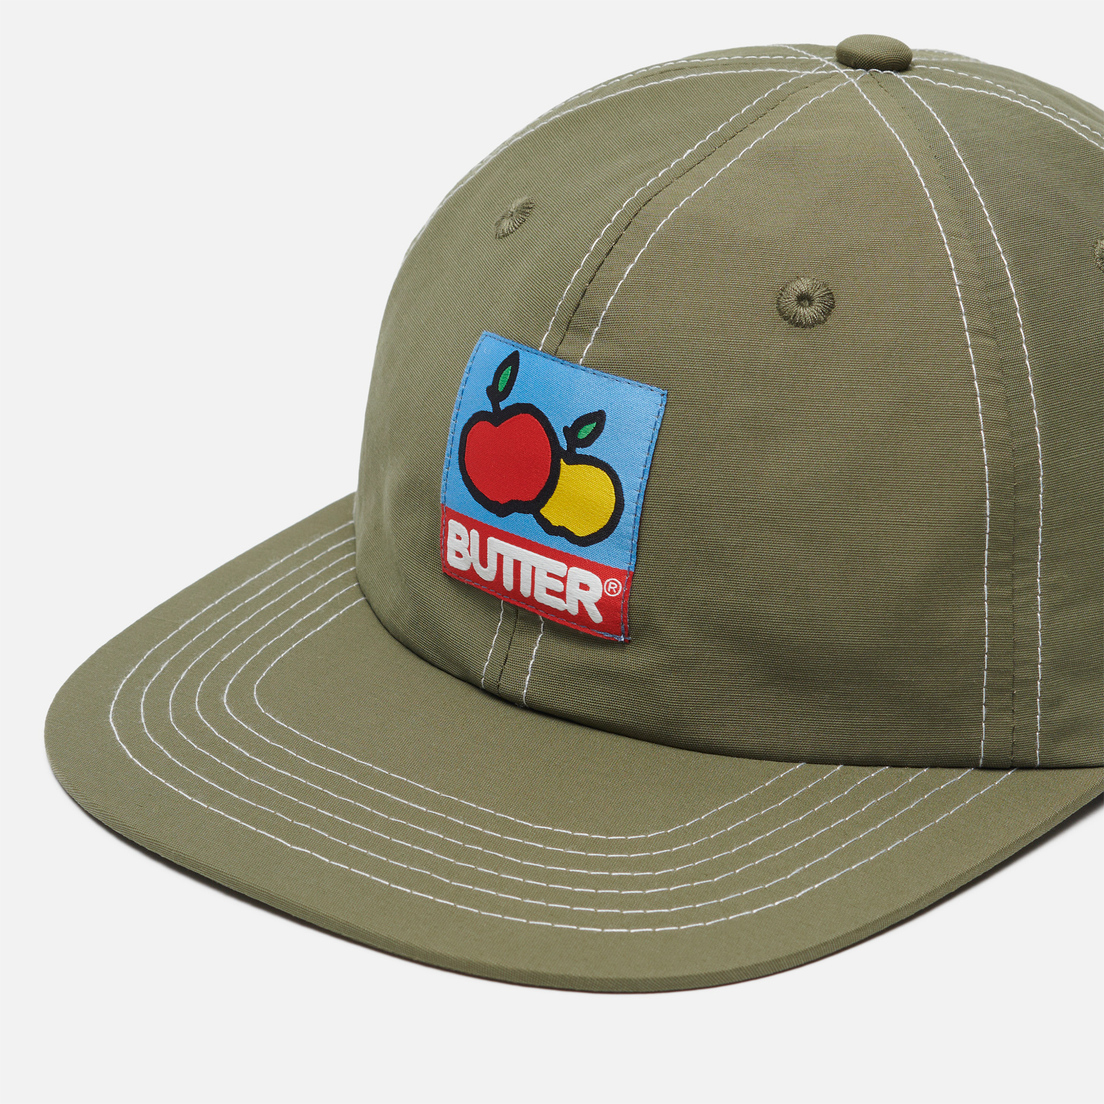 Butter Goods Кепка Grove 6 Panel